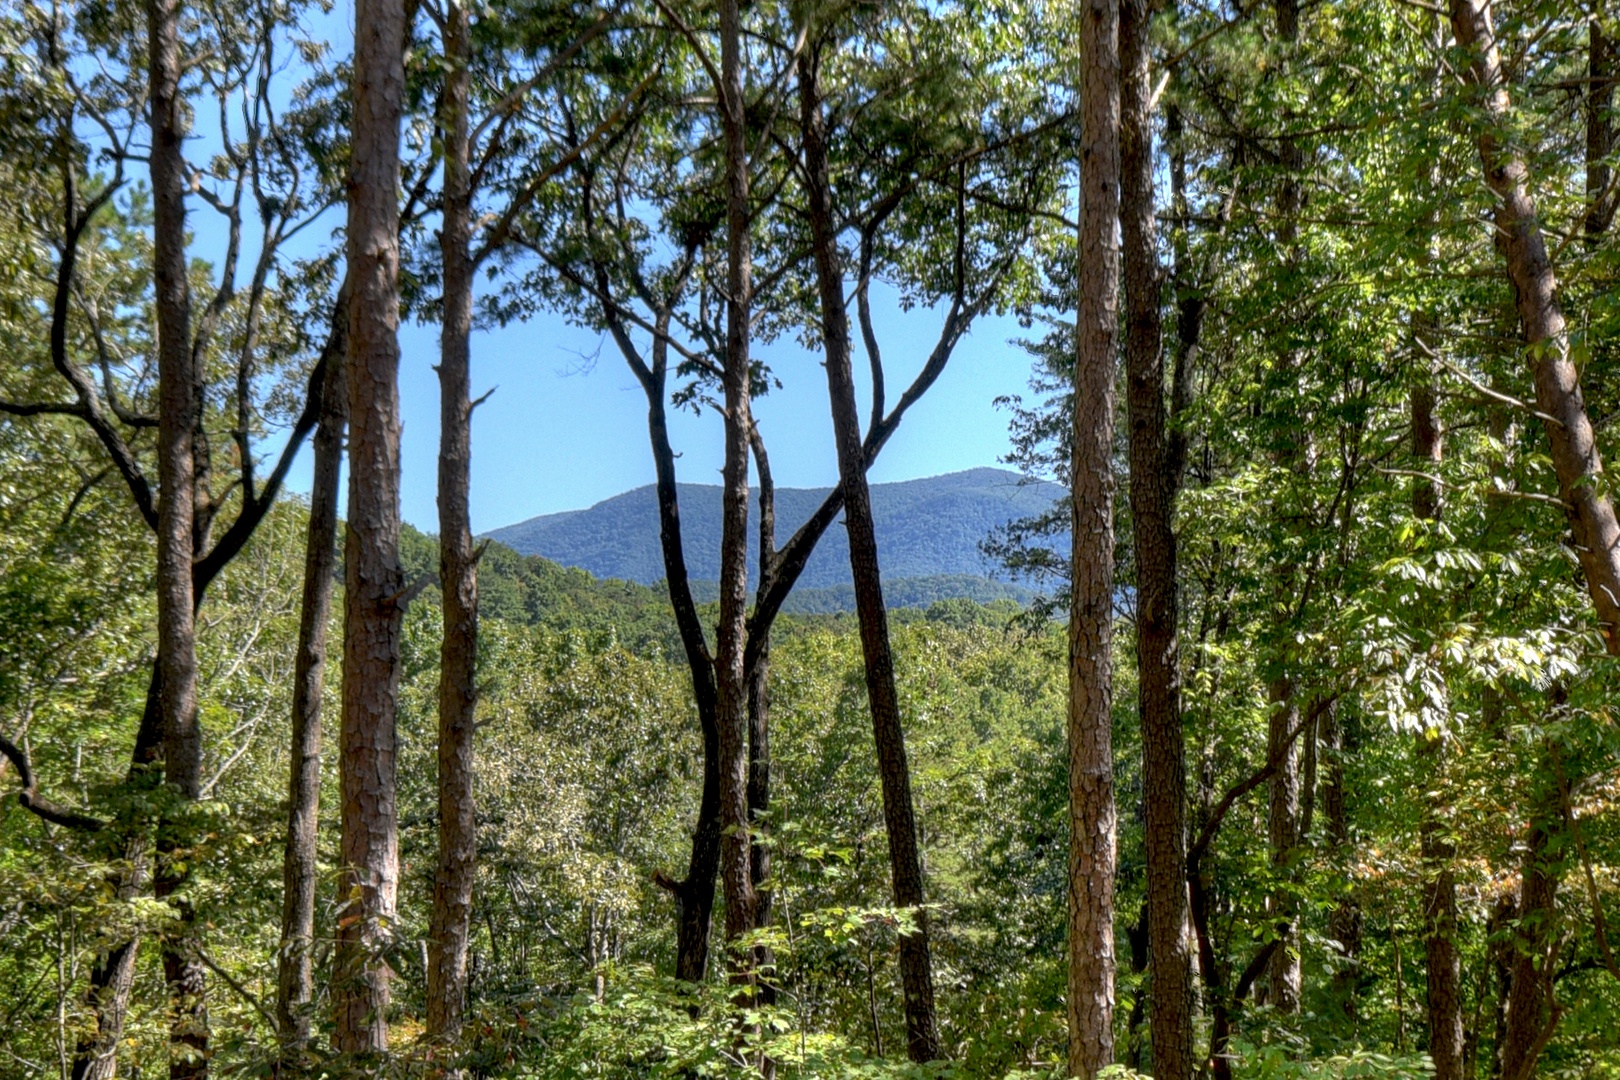 Lee's Lookout - View from Deck